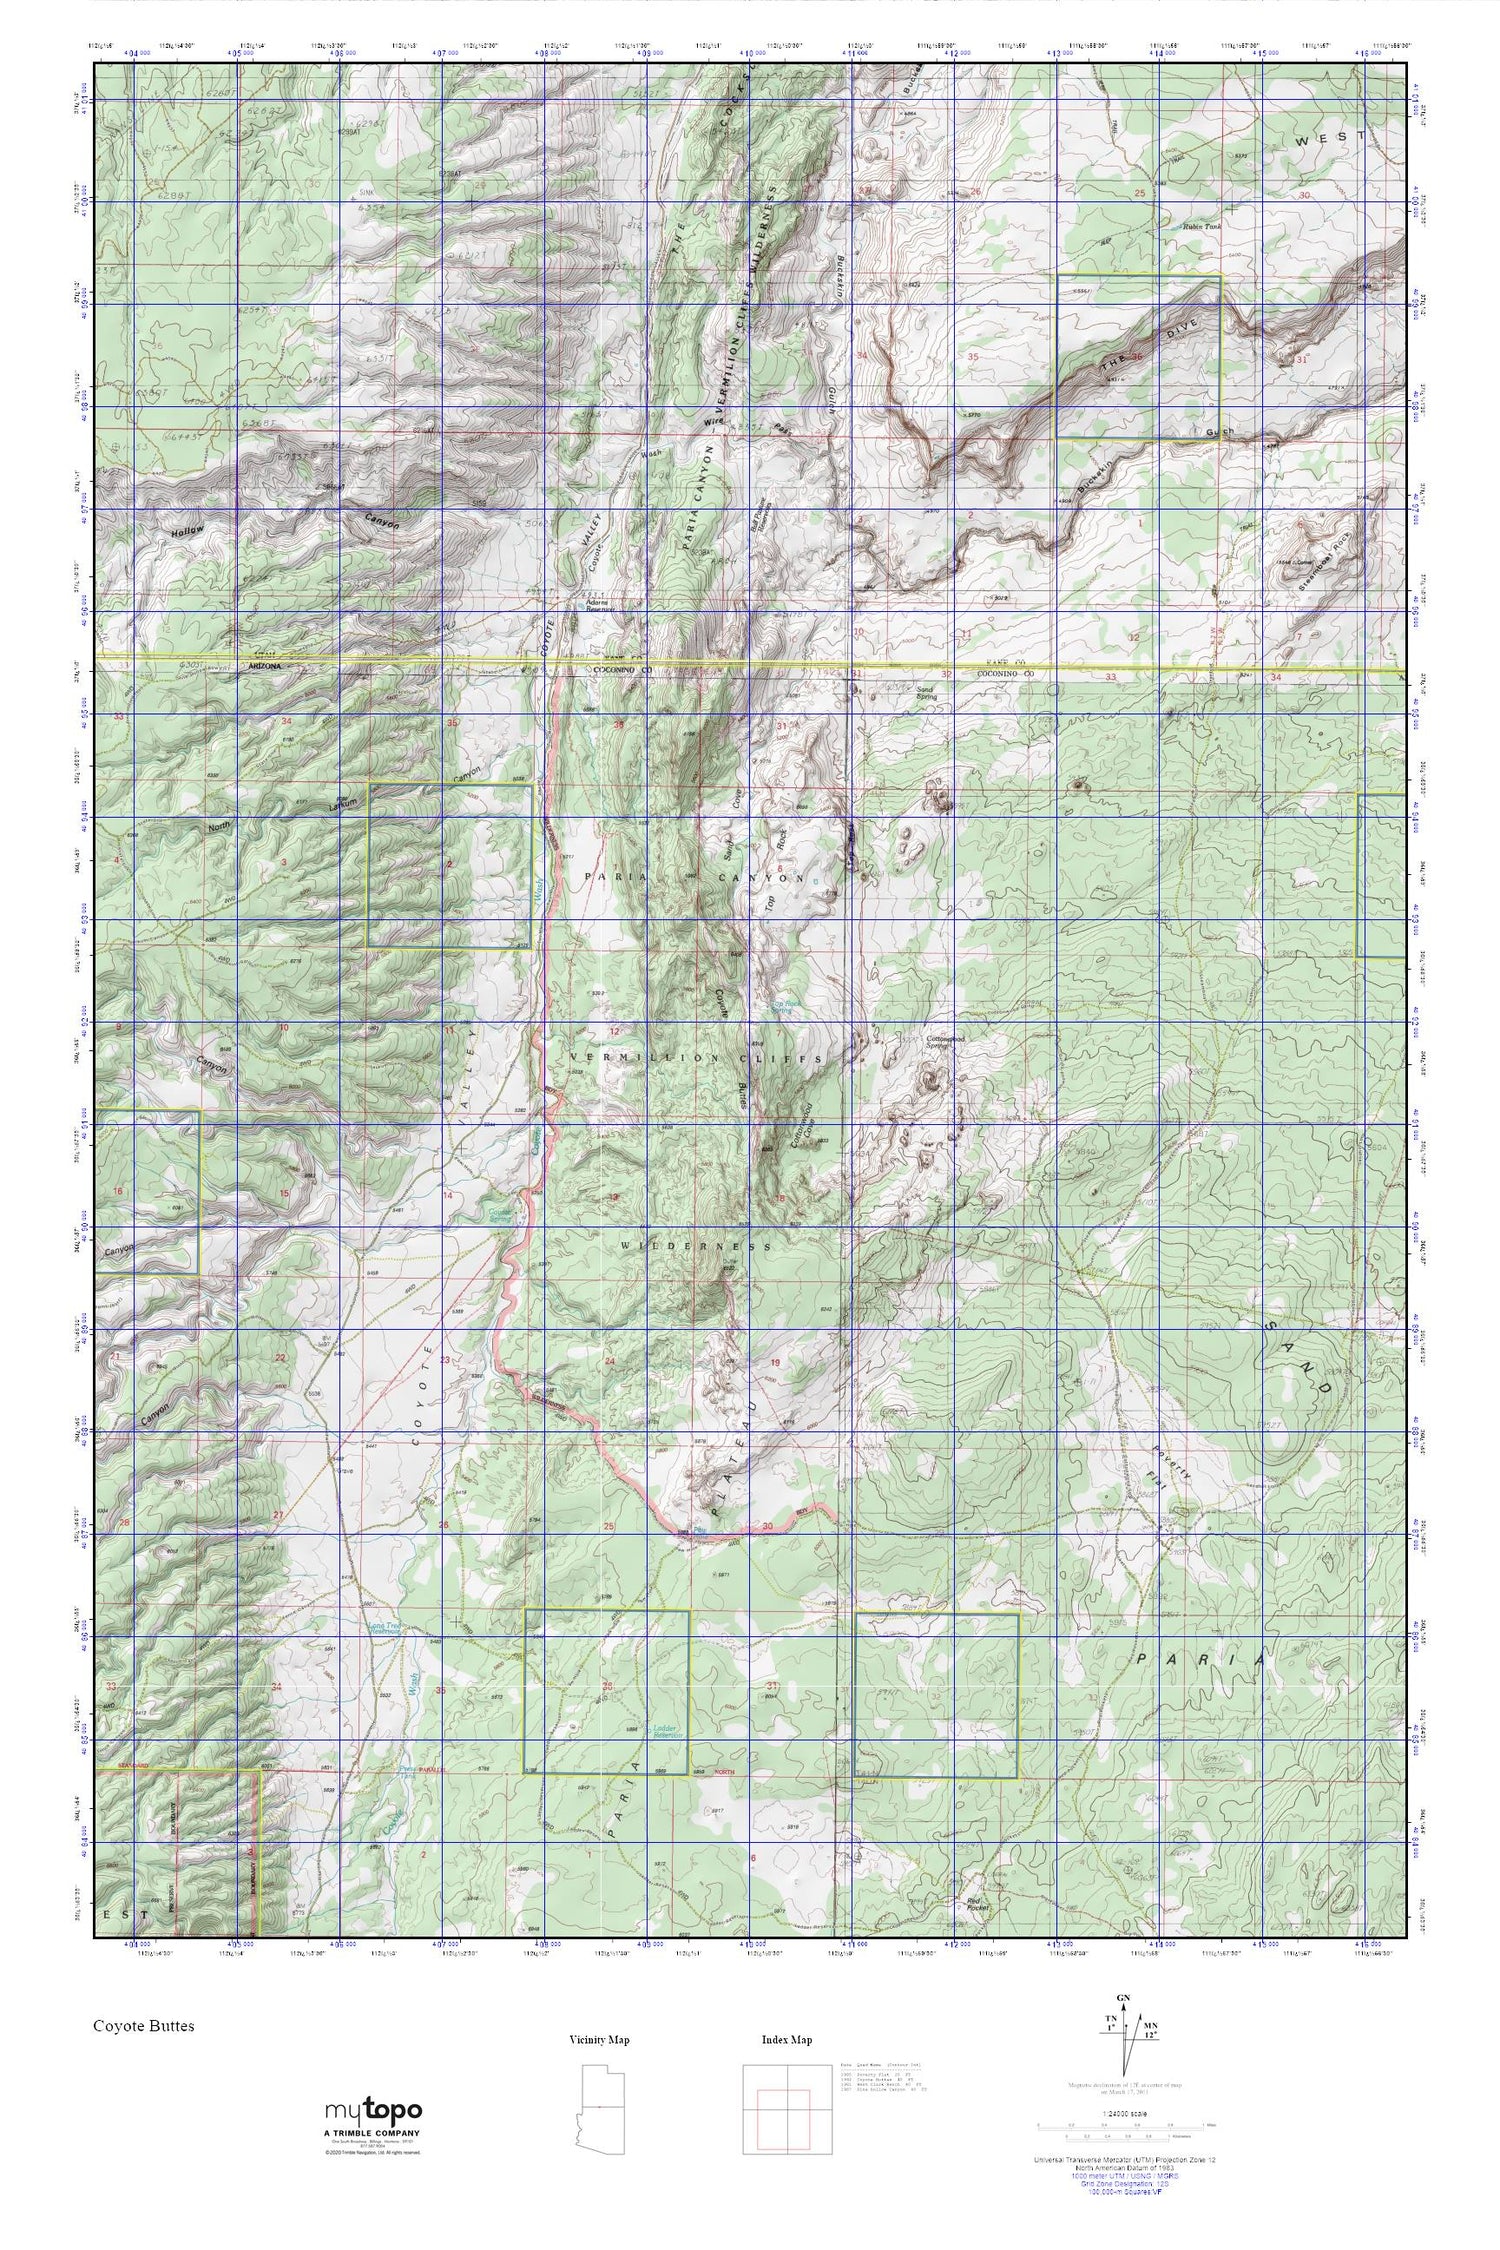 Coyote Buttes MyTopo Explorer Series Map Image